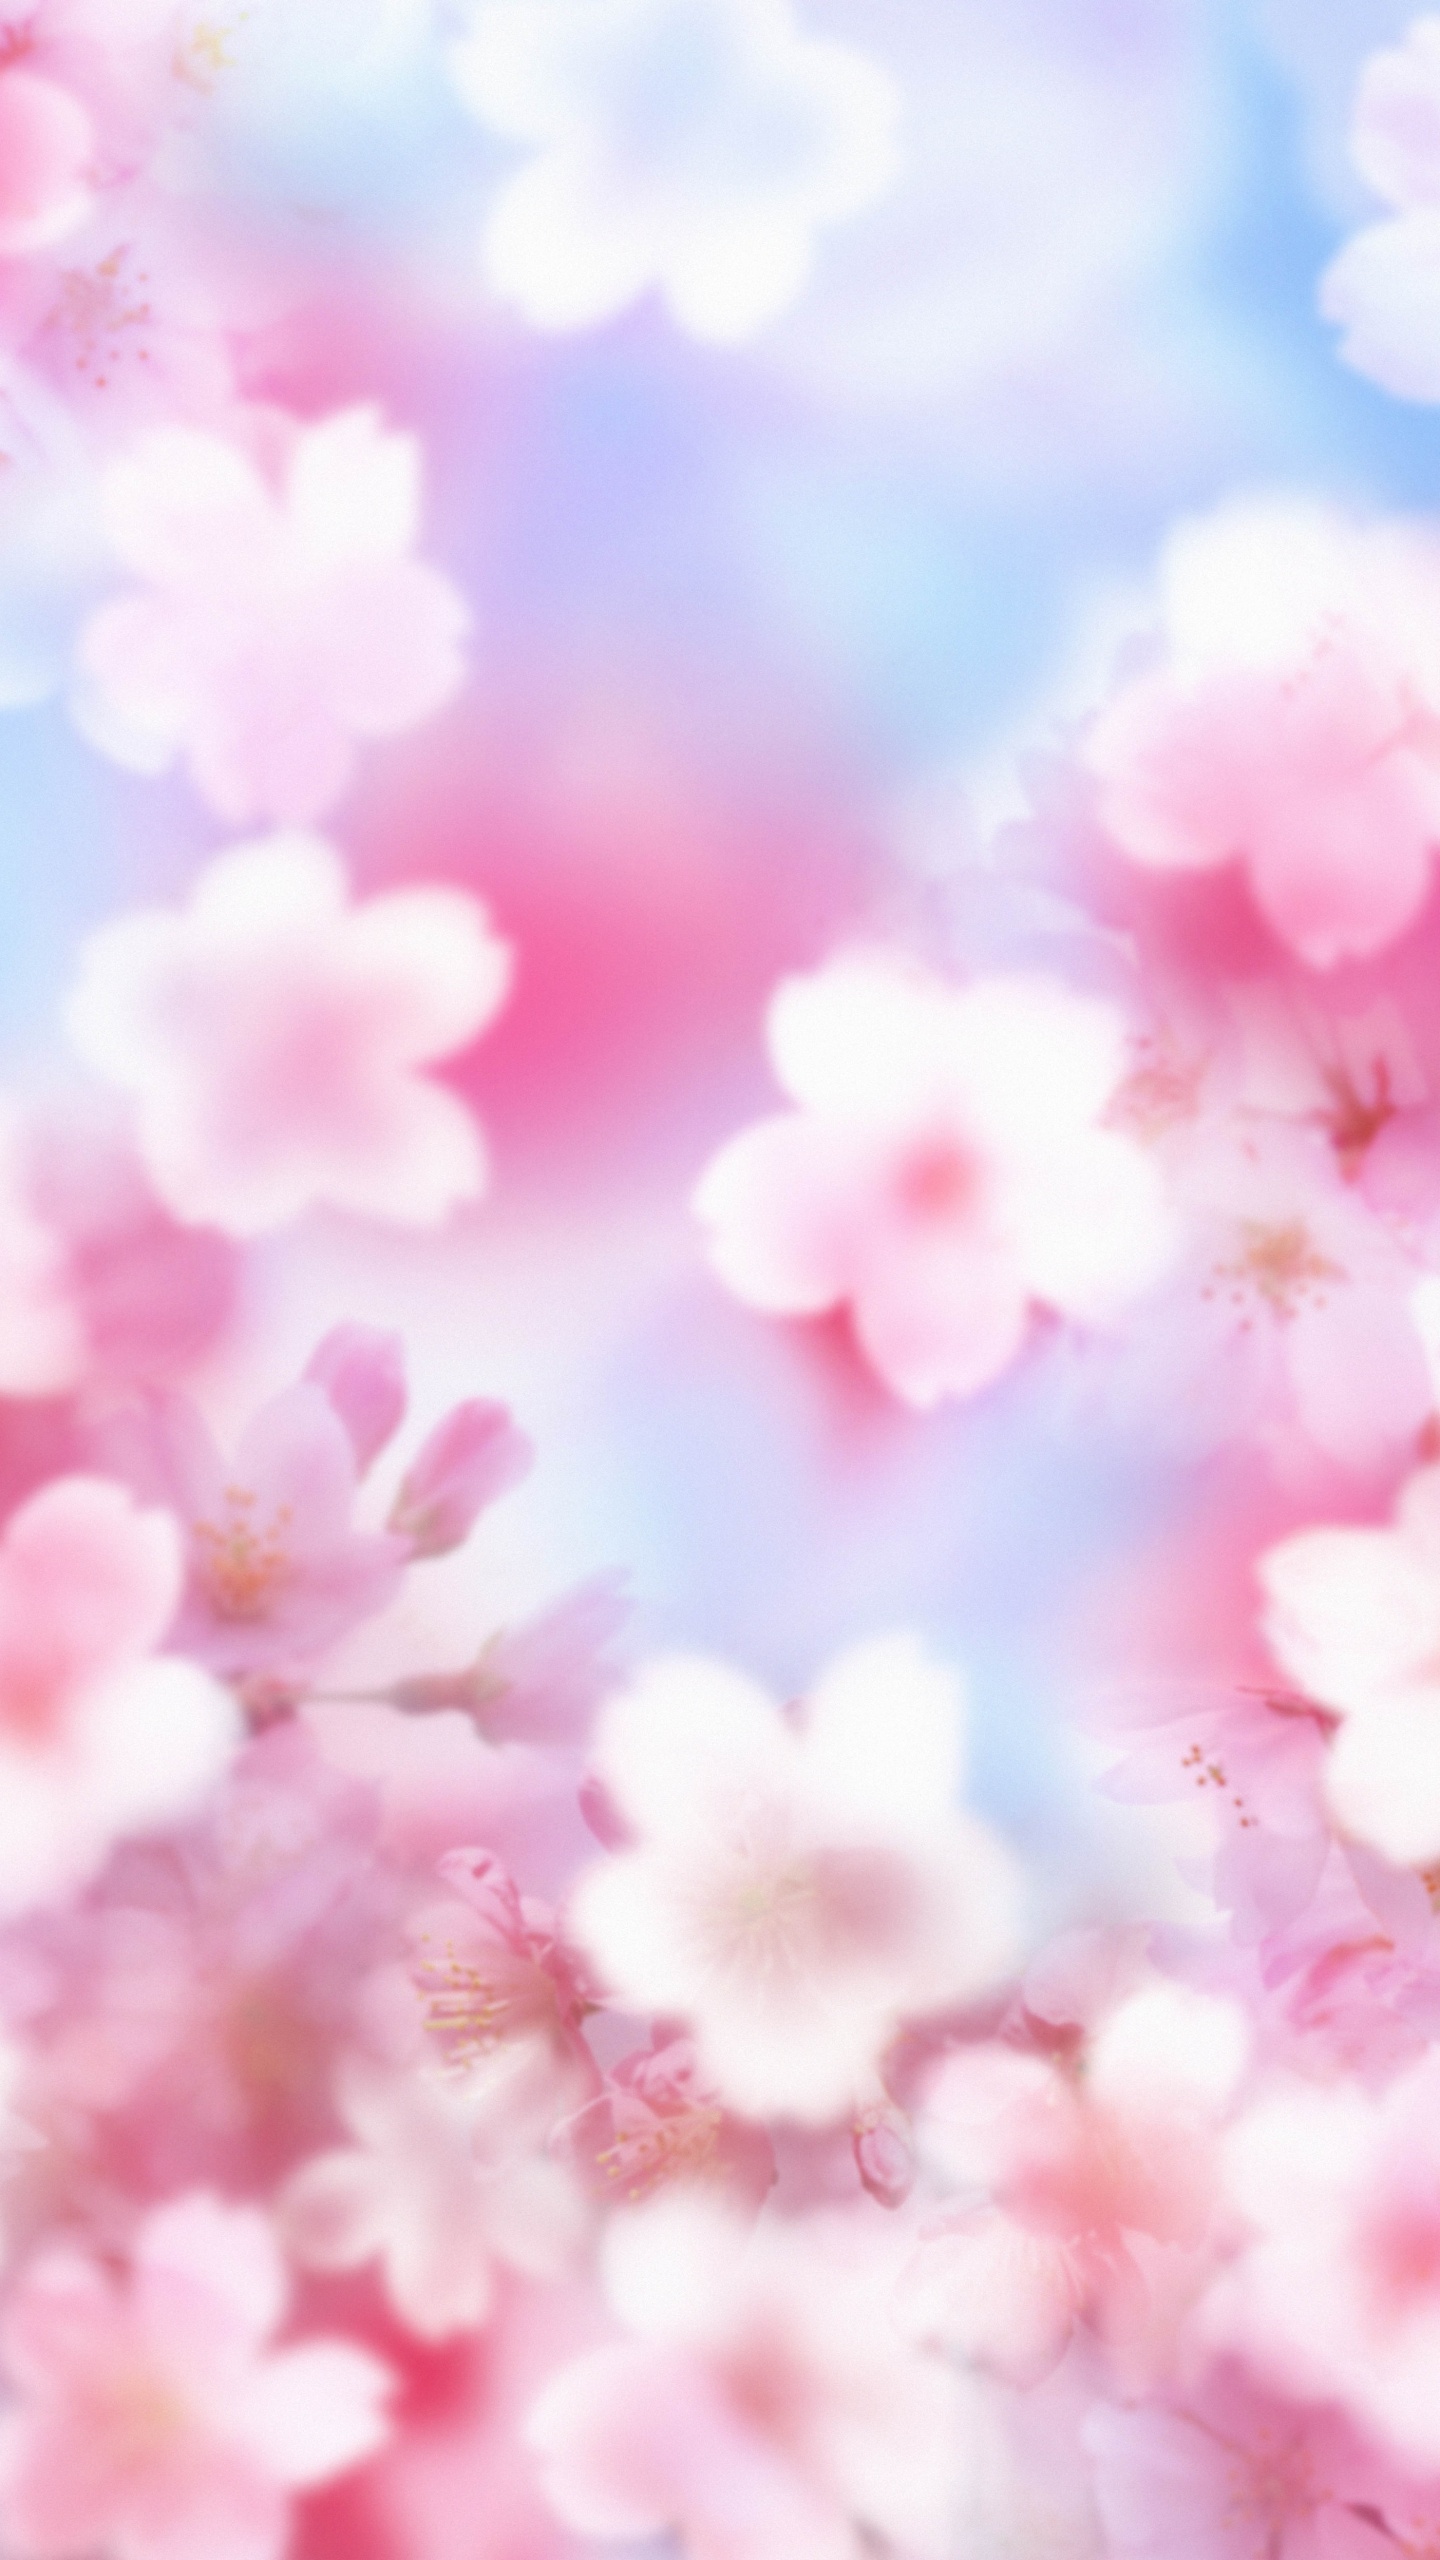 Pink Cherry Blossom Under Blue Sky During Daytime. Wallpaper in 1440x2560 Resolution